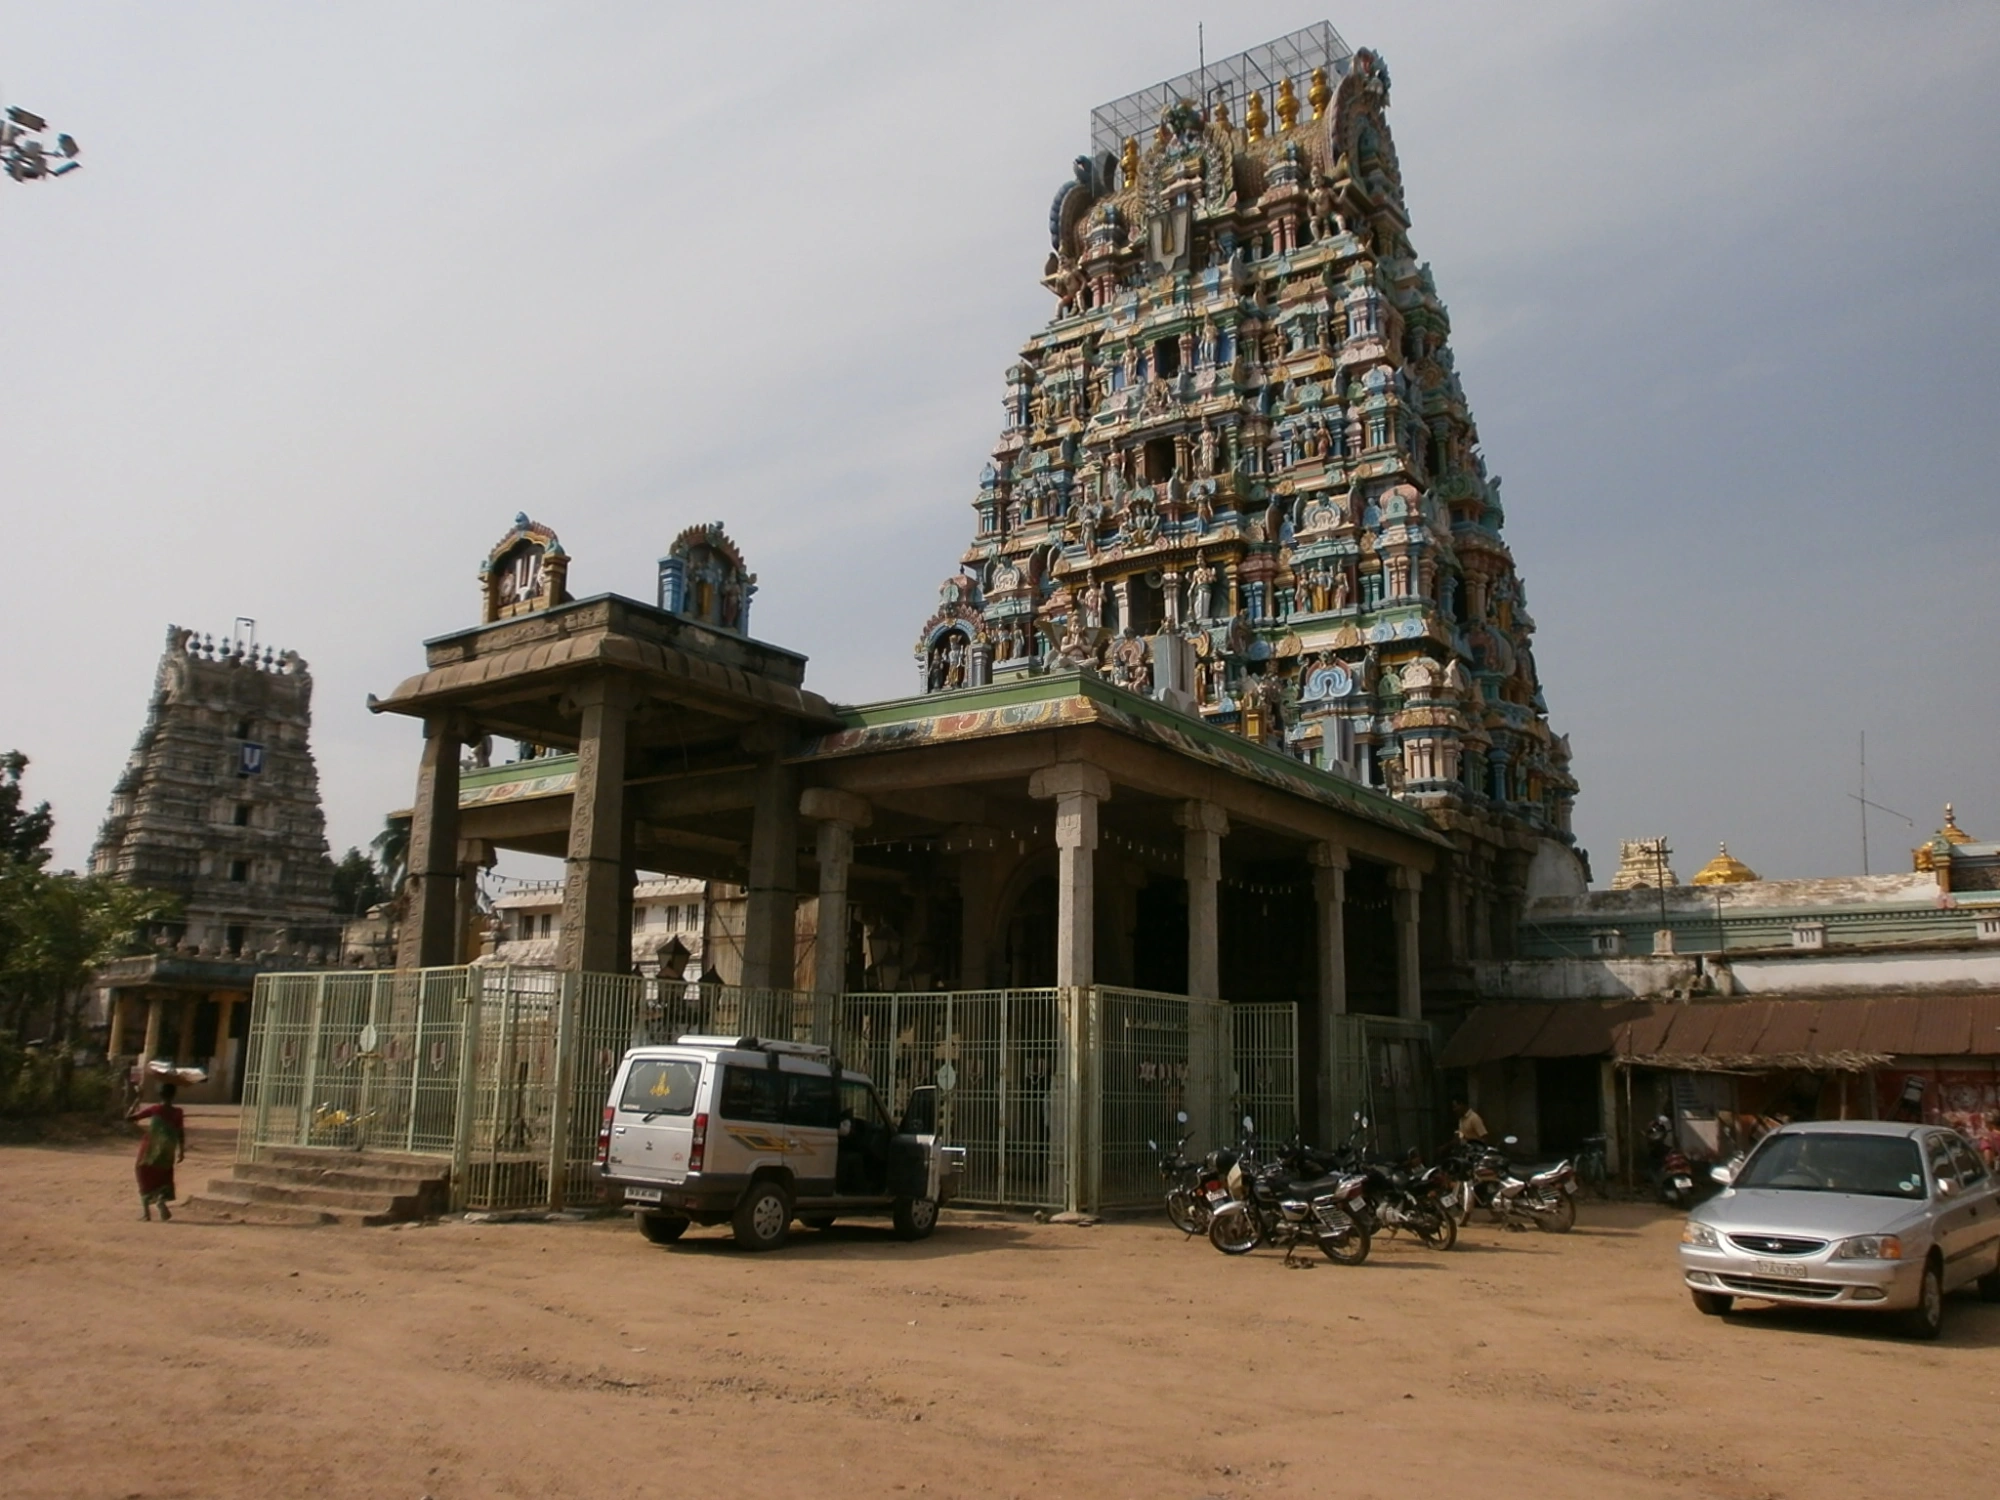 A large temple in India